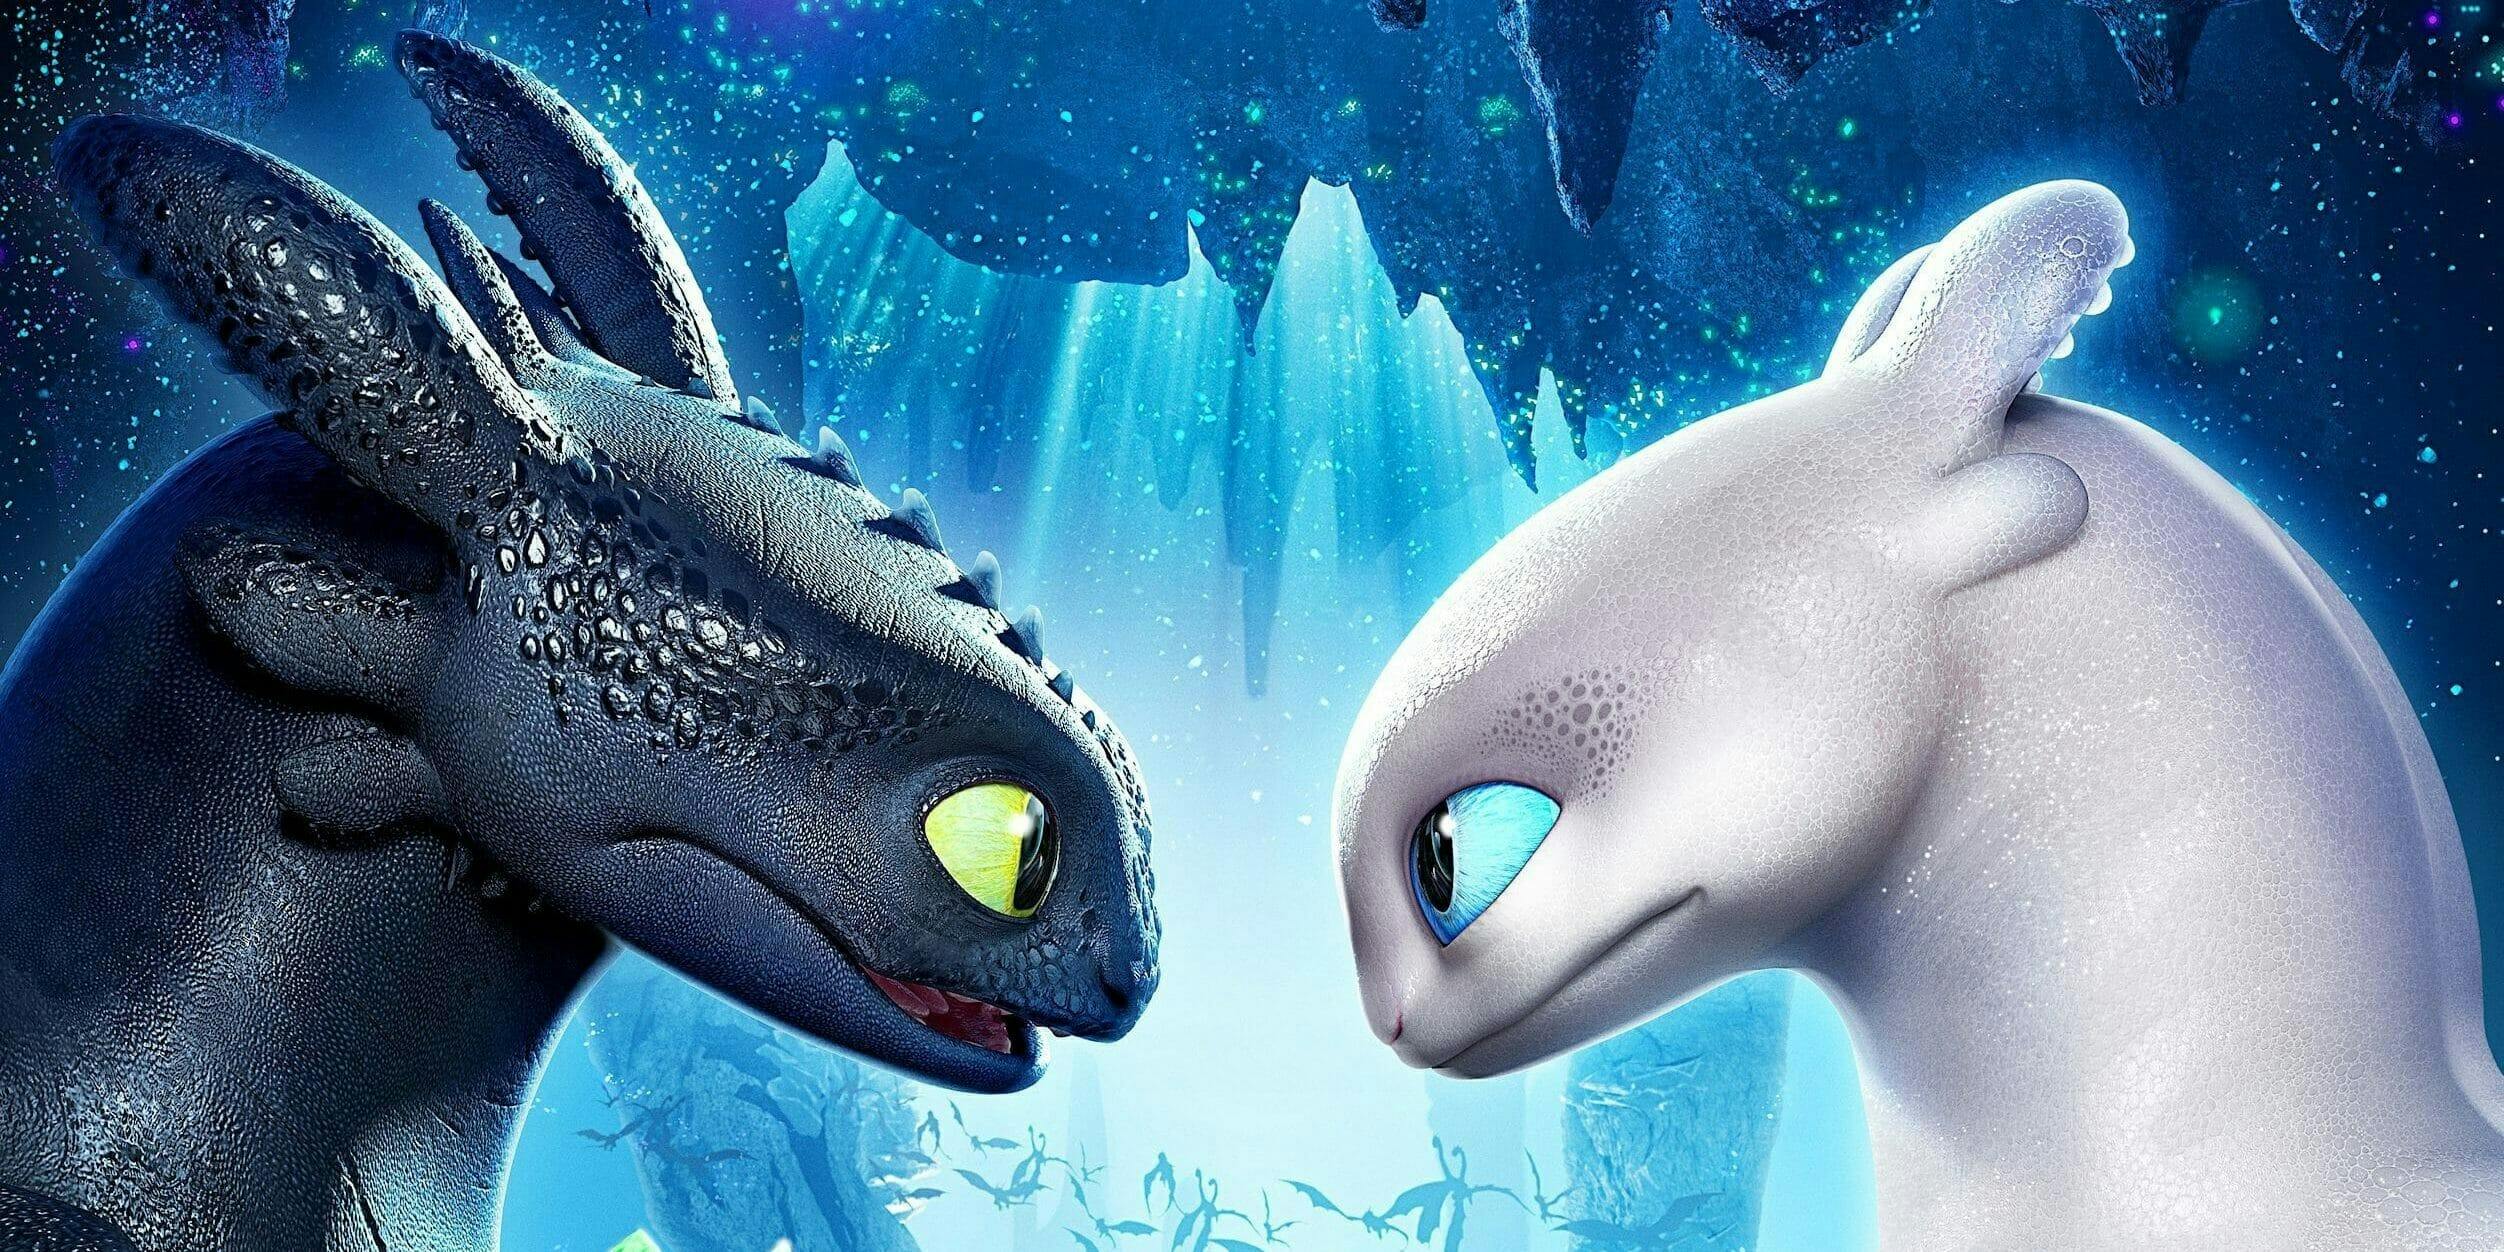 Udvinding permeabilitet Og hold Is the New Female Dragon in 'How to Train Your Dragon' Sexist?